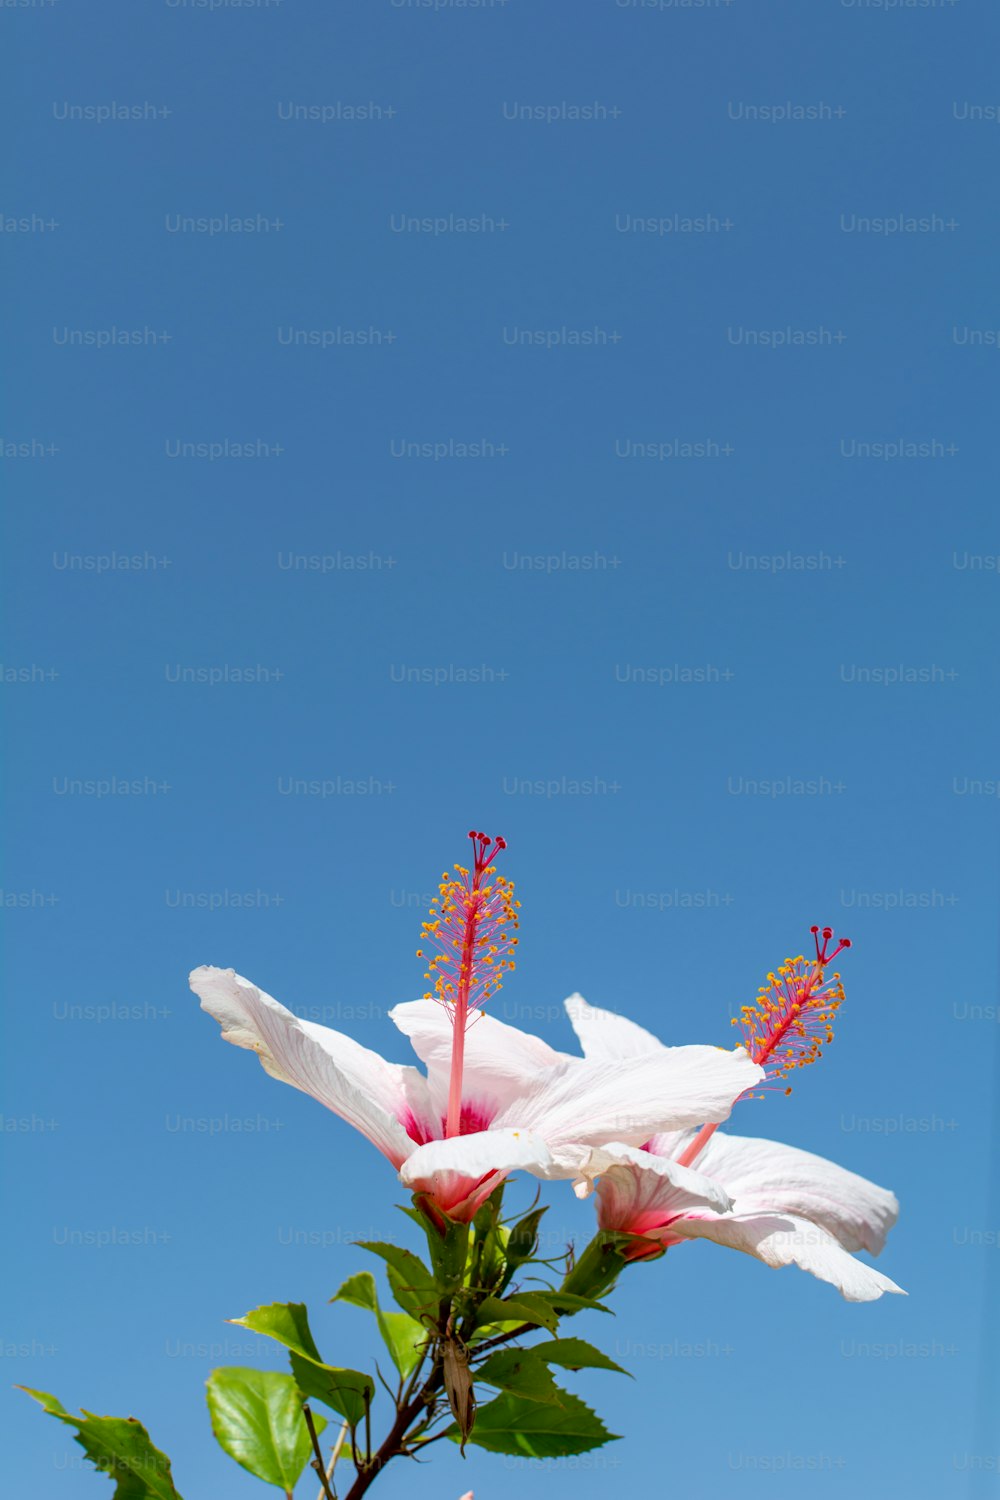 two white flowers with red stamens against a blue sky